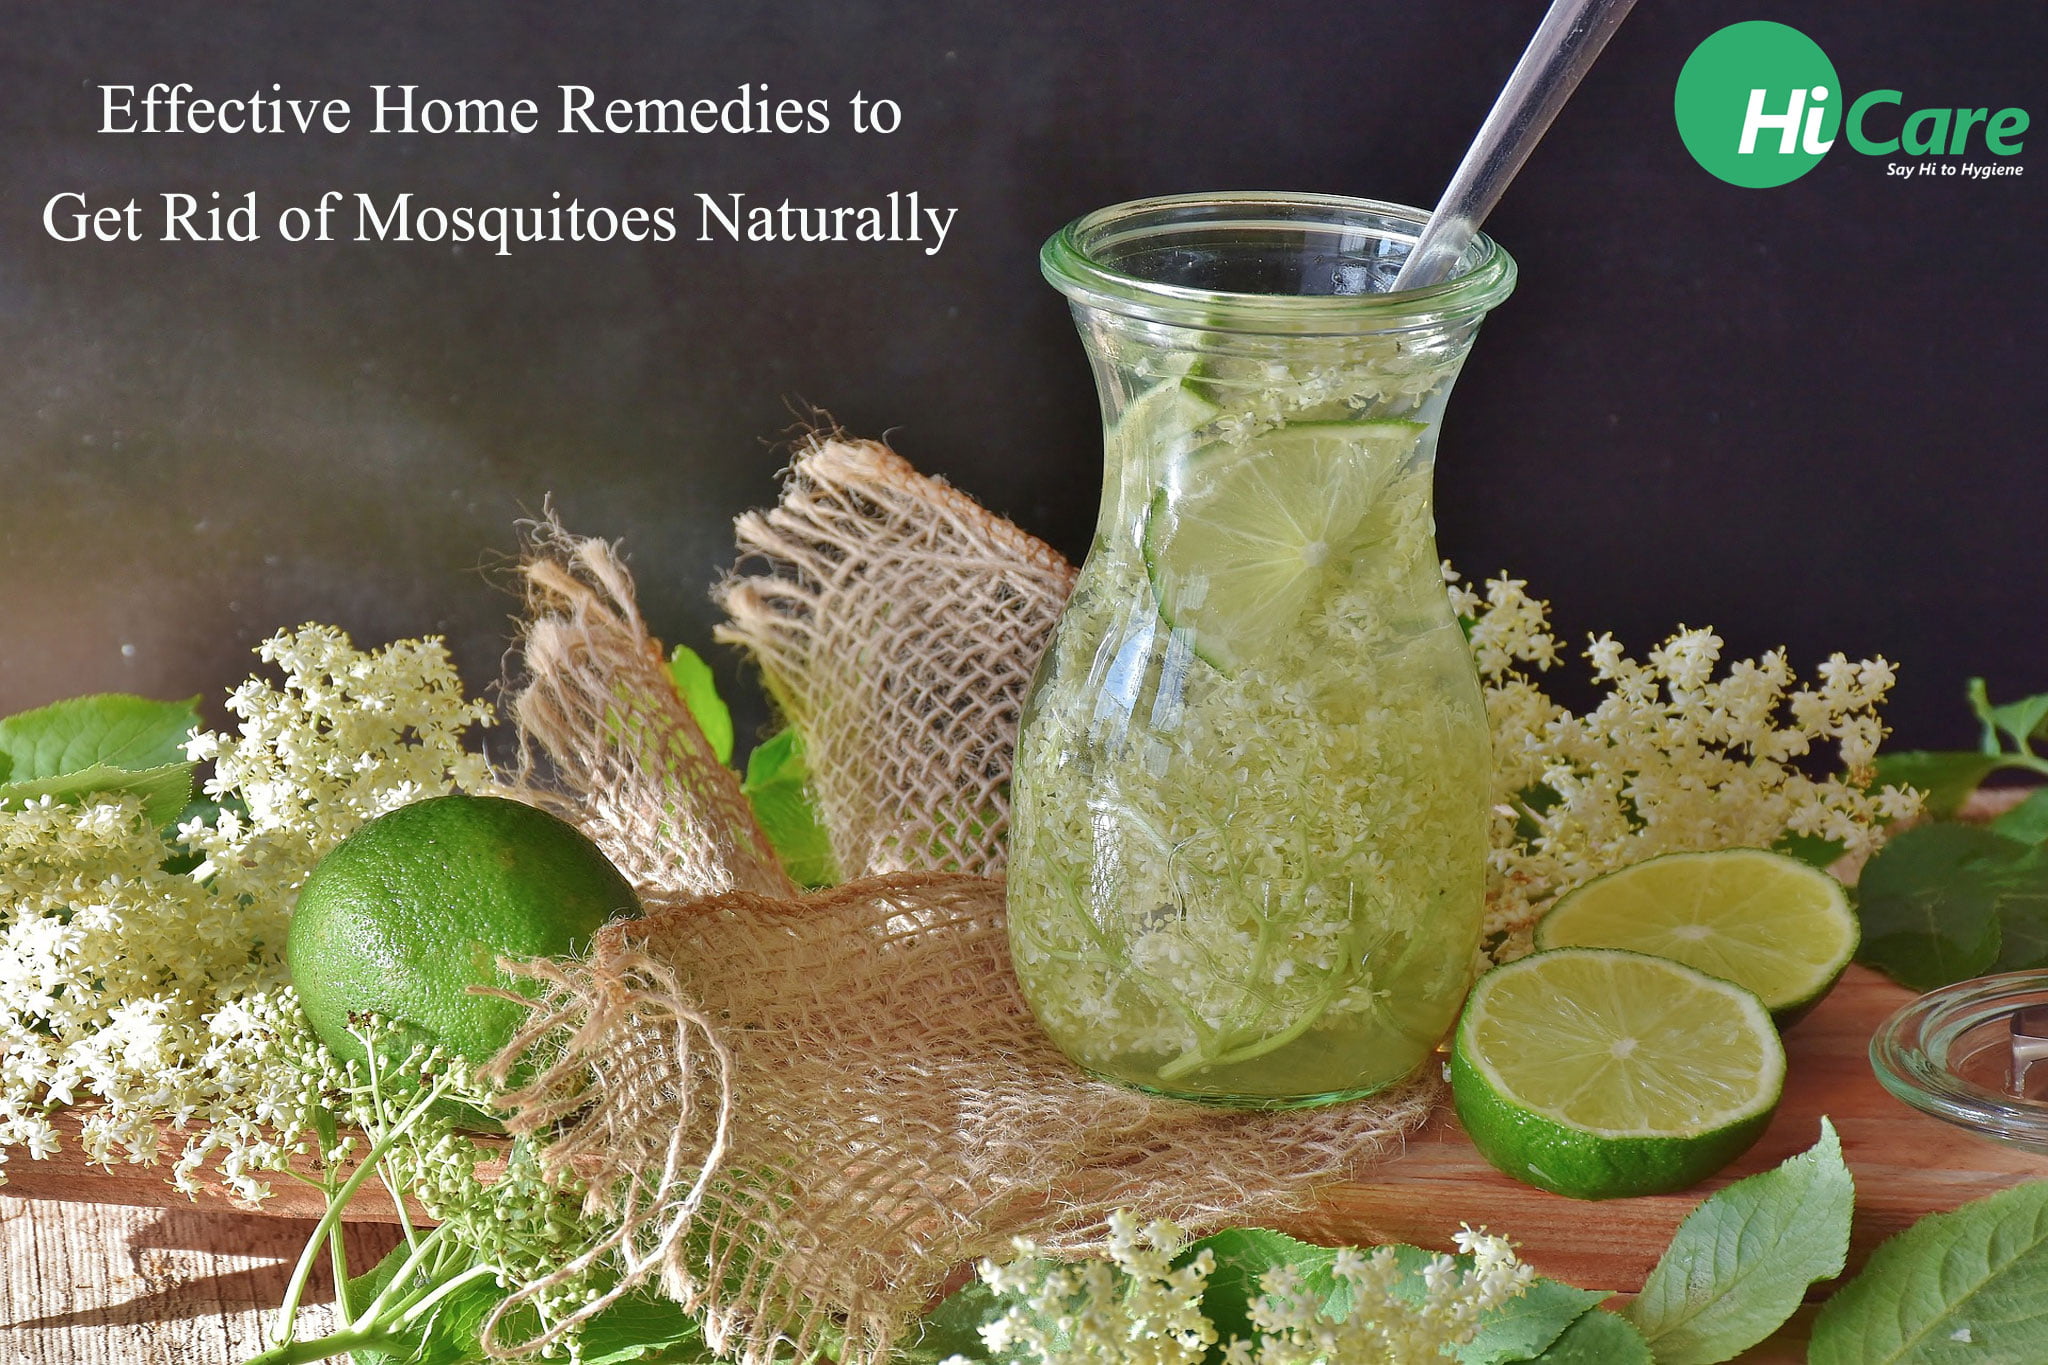 How to Avoid Mosquitoes at Home Naturally?